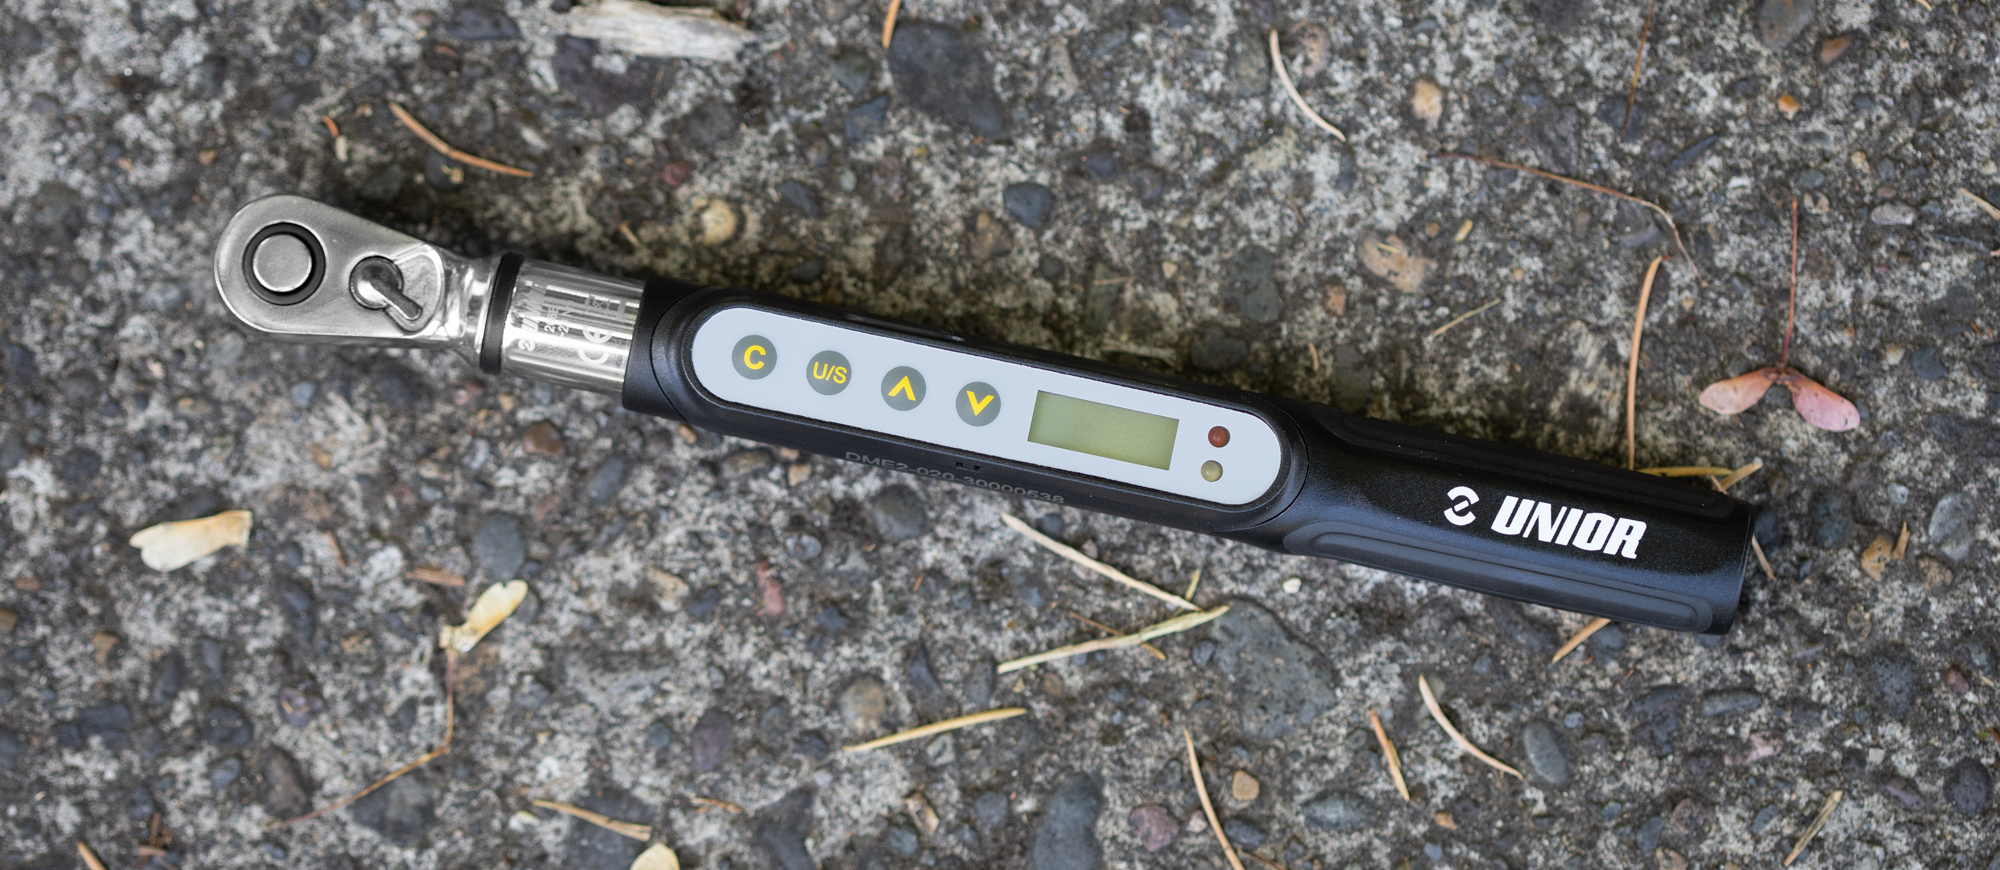 Does price matter when it comes to choosing a torque wrench